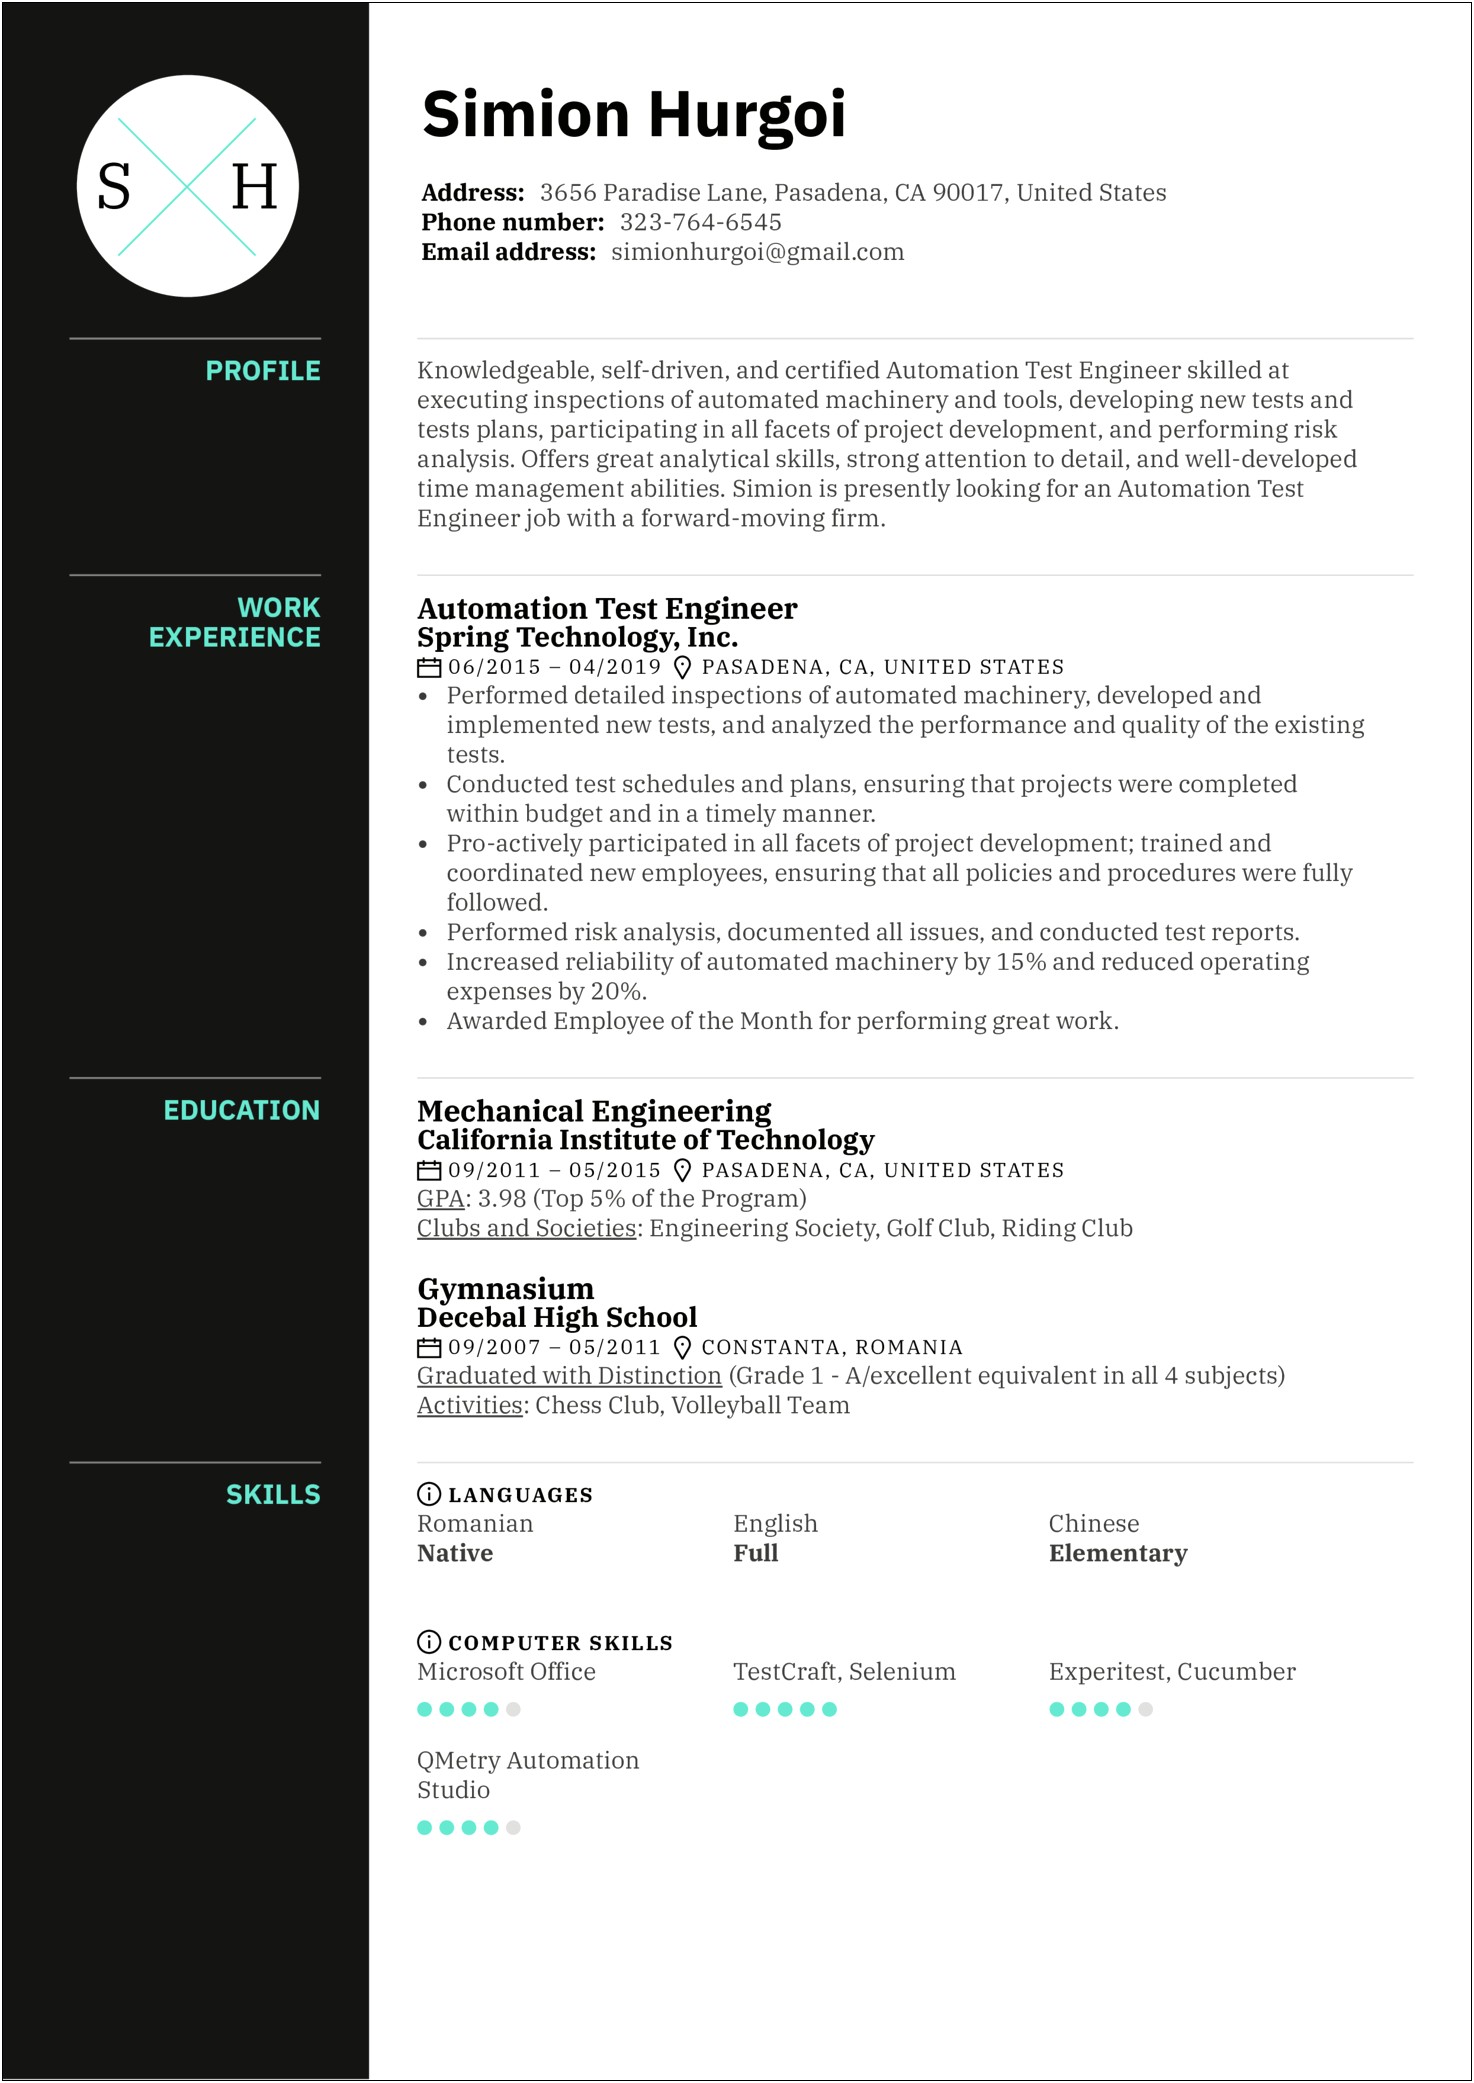 Automation Testing 1 Year Experience Resume